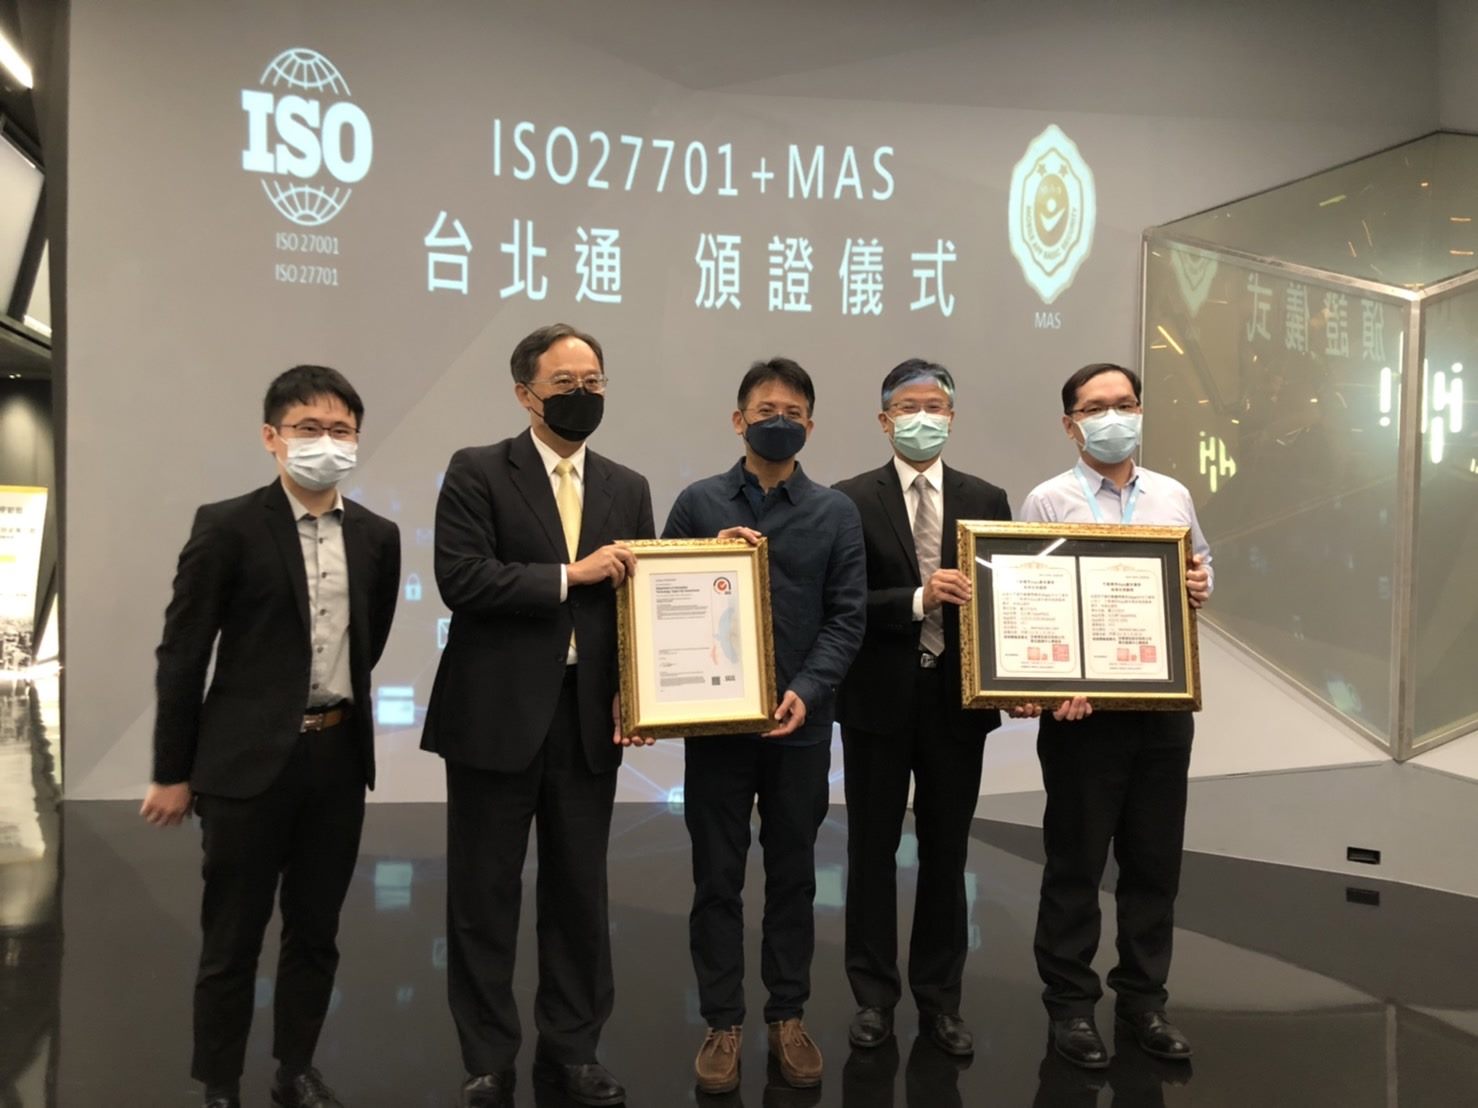  Commissioner Lu and delegates at the ISO 27701 presentation ceremony